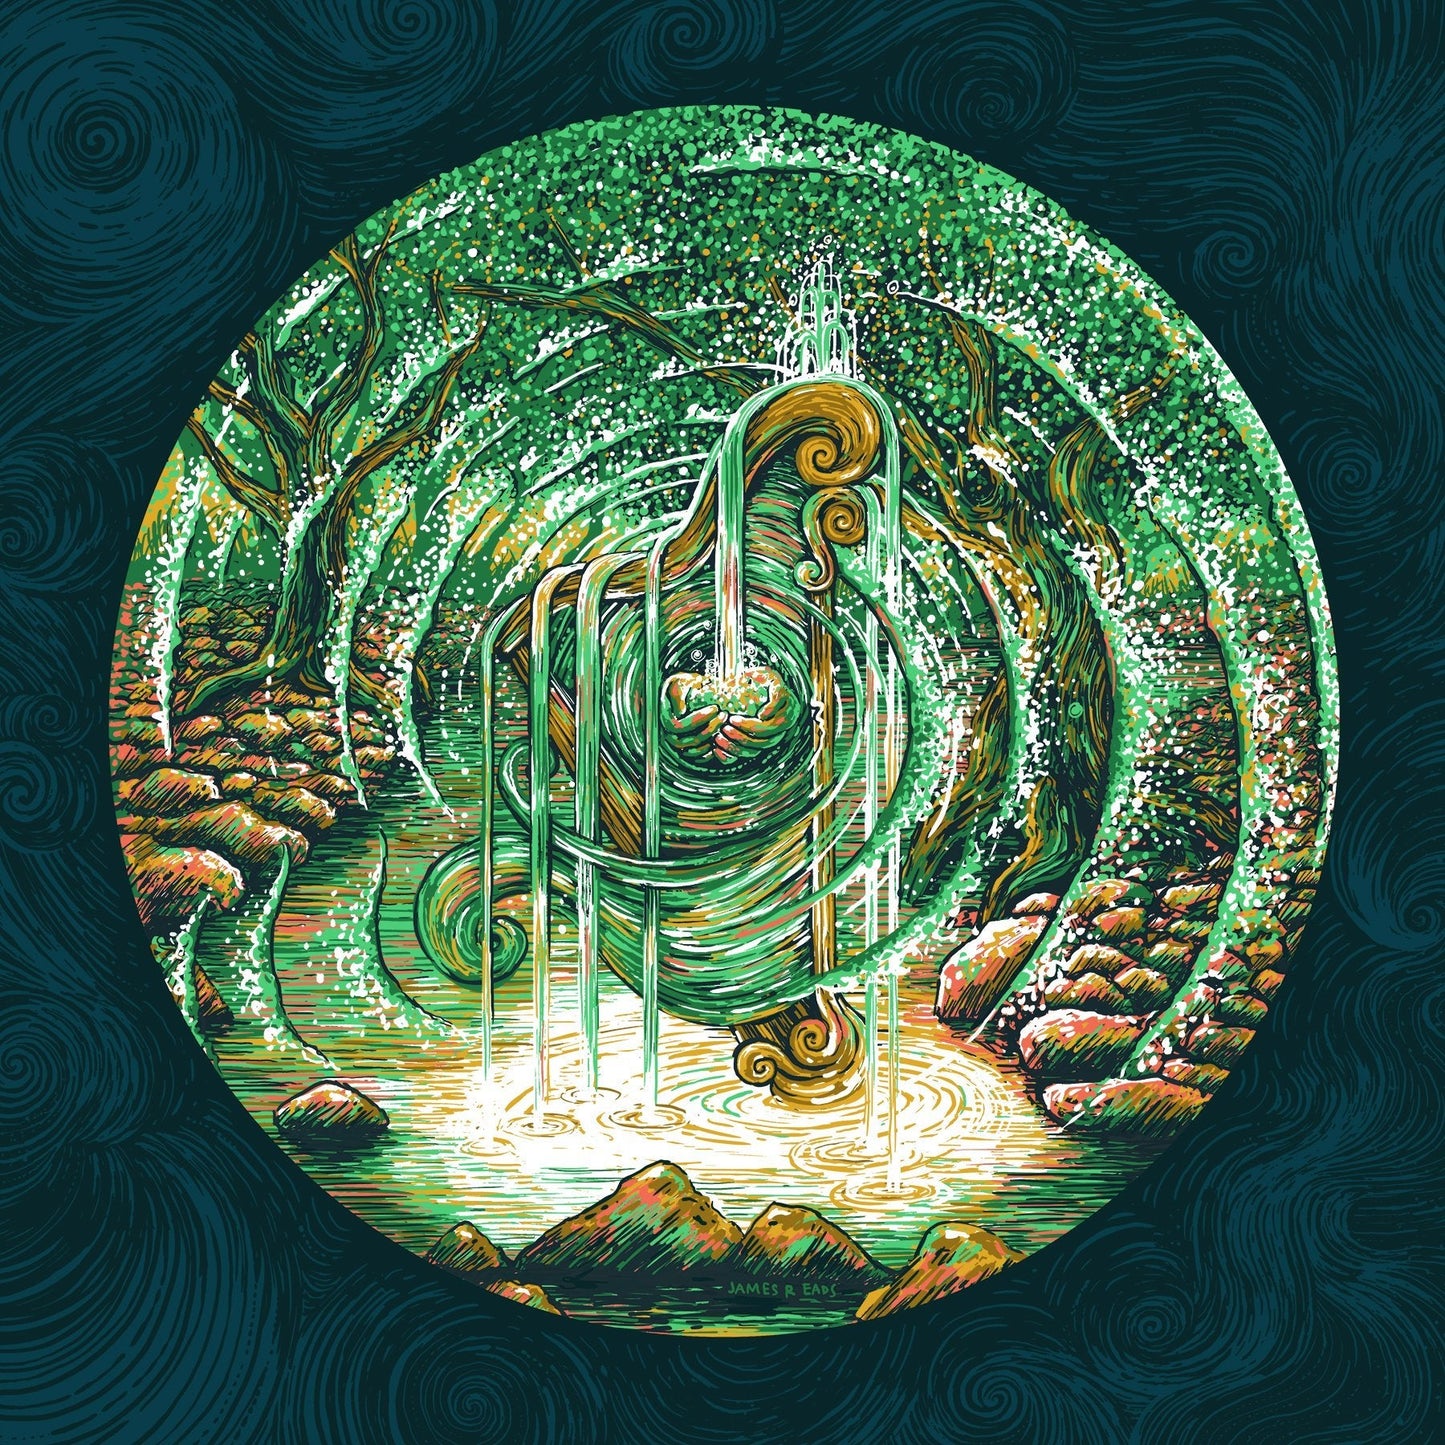 The Half-Dream Harp (Available at Posters 4 People) James R. Eads